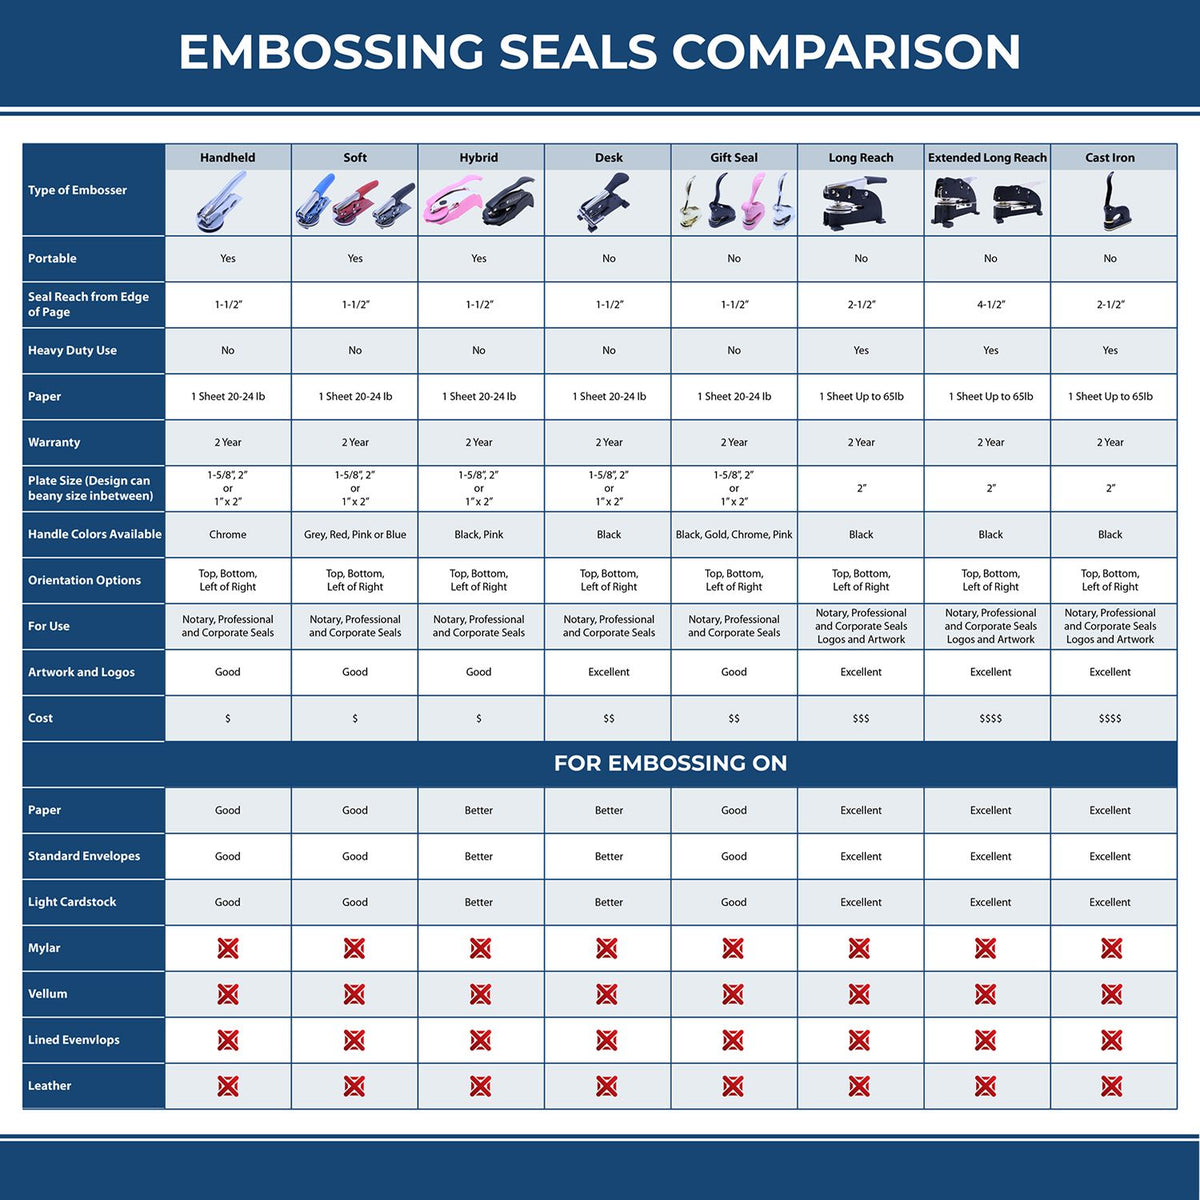 A comparison chart for the different types of mount models available for the Heavy Duty Cast Iron Minnesota Engineer Seal Embosser.